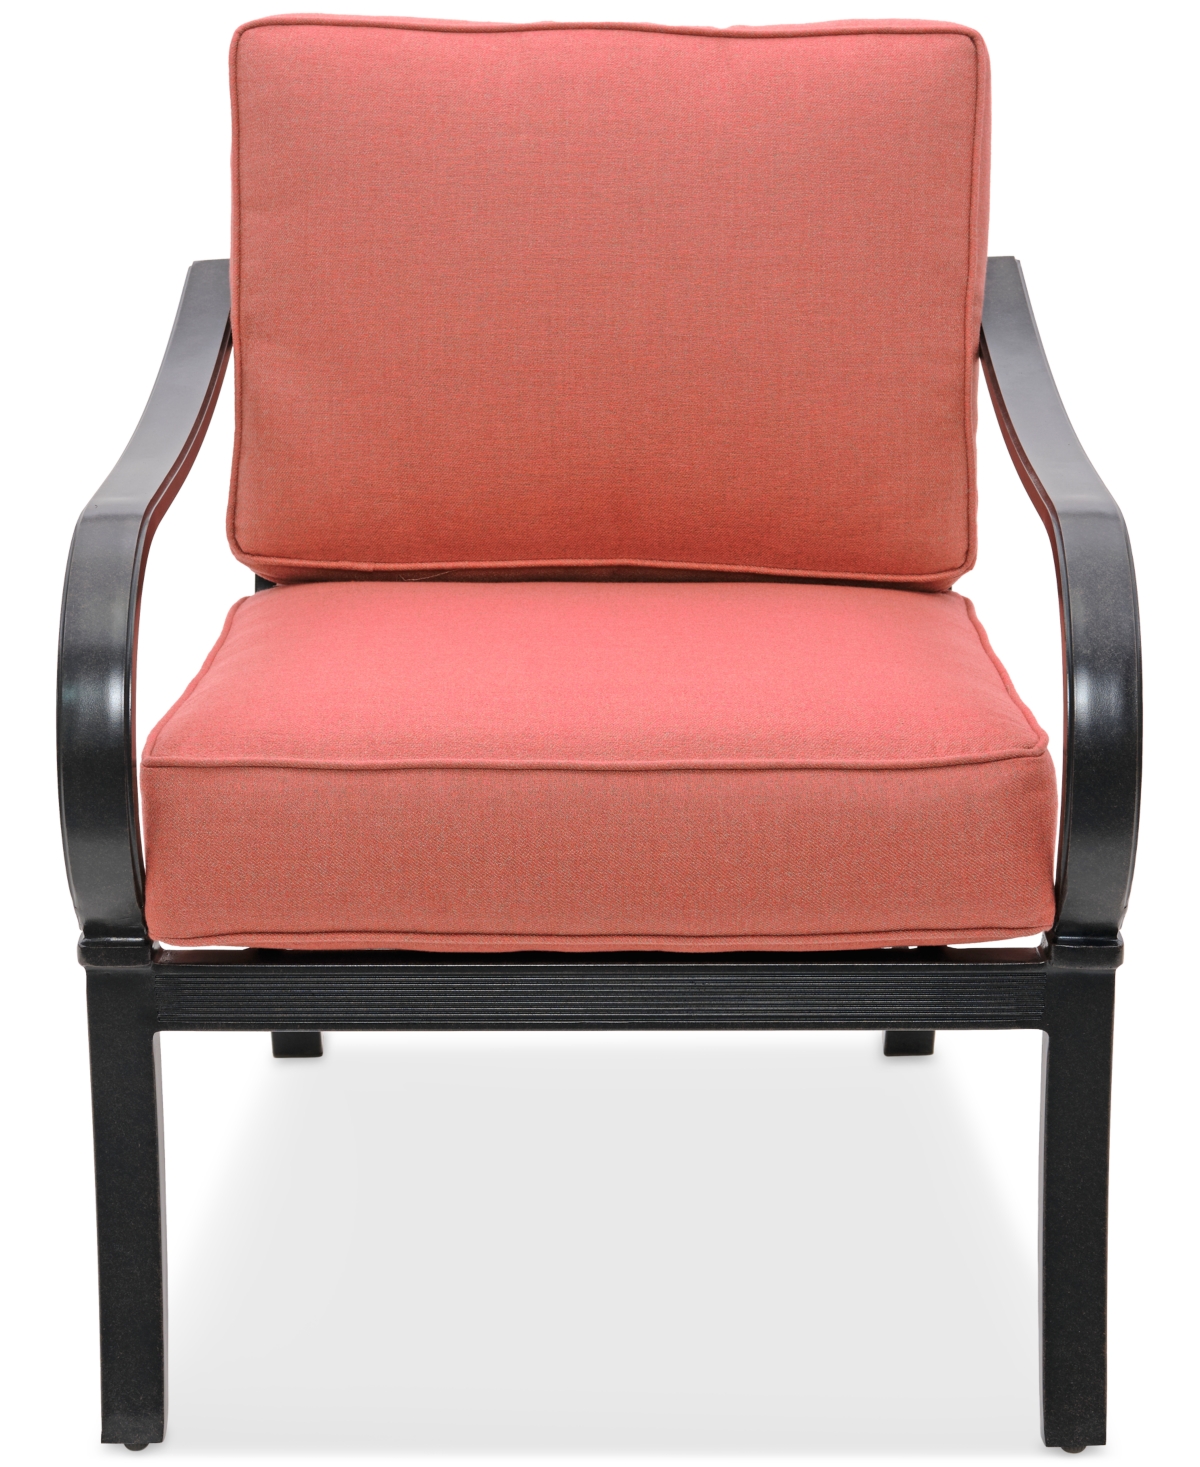 Agio St Croix Outdoor Lounge Chair In Peony Brick Red